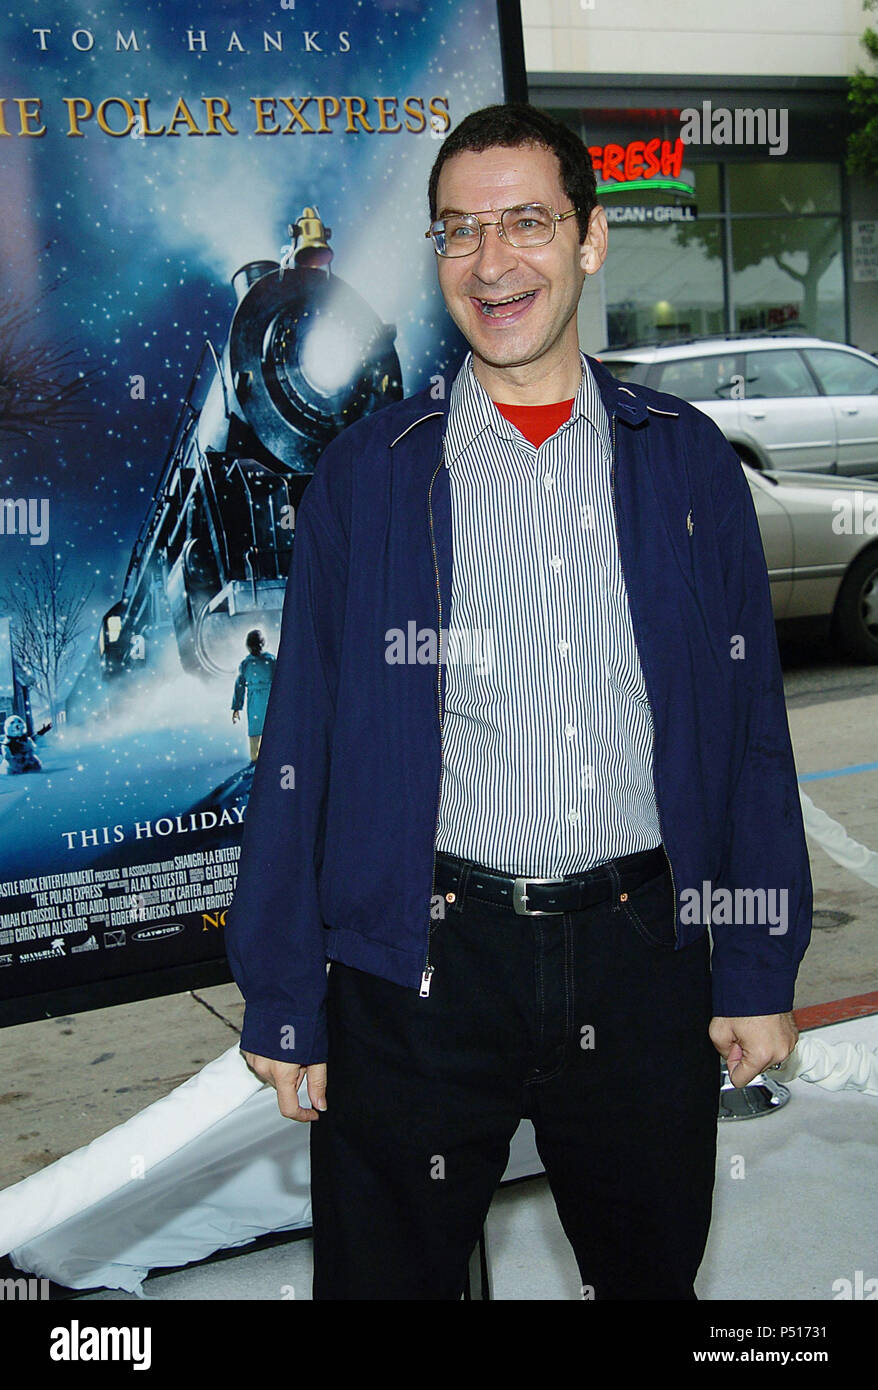 Eddie Deezen arriving at the Polar Express Premiere at The Grauman Chinese Theatre in Los Angeles. 11/07/2004. DeezenEddie039 Red Carpet Event, Vertical, USA, Film Industry, Celebrities,  Photography, Bestof, Arts Culture and Entertainment, Topix Celebrities fashion /  Vertical, Best of, Event in Hollywood Life - California,  Red Carpet and backstage, USA, Film Industry, Celebrities,  movie celebrities, TV celebrities, Music celebrities, Photography, Bestof, Arts Culture and Entertainment,  Topix, vertical, one person,, from the years , 2003 to 2005, inquiry tsuni@Gamma-USA.com - Three Quarter Stock Photo